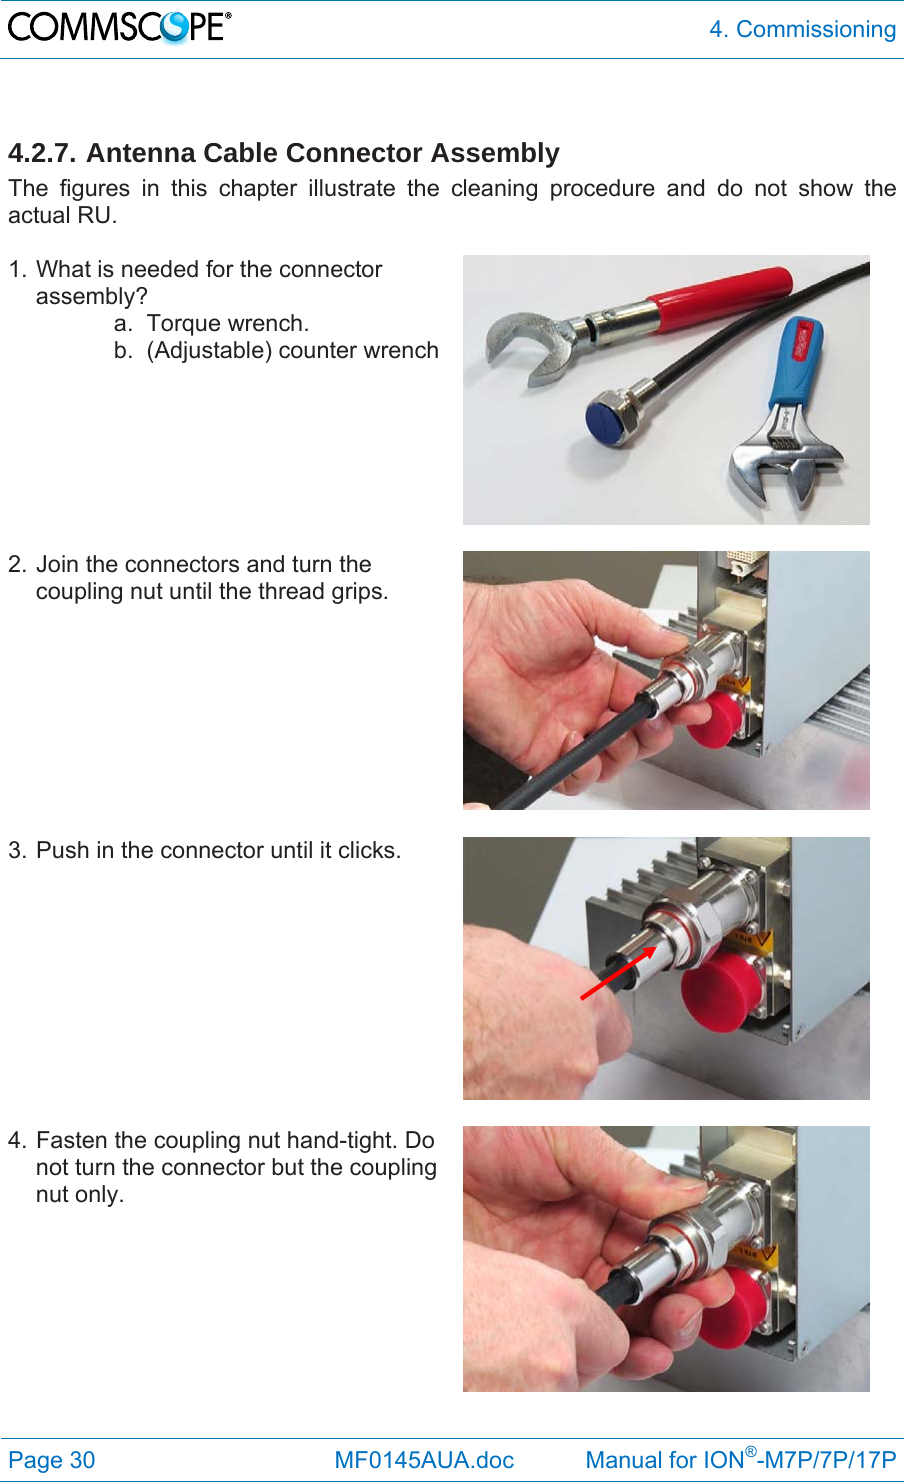  4. Commissioning Page 30              MF0145AUA.doc           Manual for ION®-M7P/7P/17P  4.2.7. Antenna Cable Connector Assembly The figures in this chapter illustrate the cleaning procedure and do not show the actual RU.  1. What is needed for the connector assembly? a. Torque wrench. b.  (Adjustable) counter wrench   2. Join the connectors and turn the coupling nut until the thread grips.   3. Push in the connector until it clicks.   4. Fasten the coupling nut hand-tight. Do not turn the connector but the coupling nut only. 